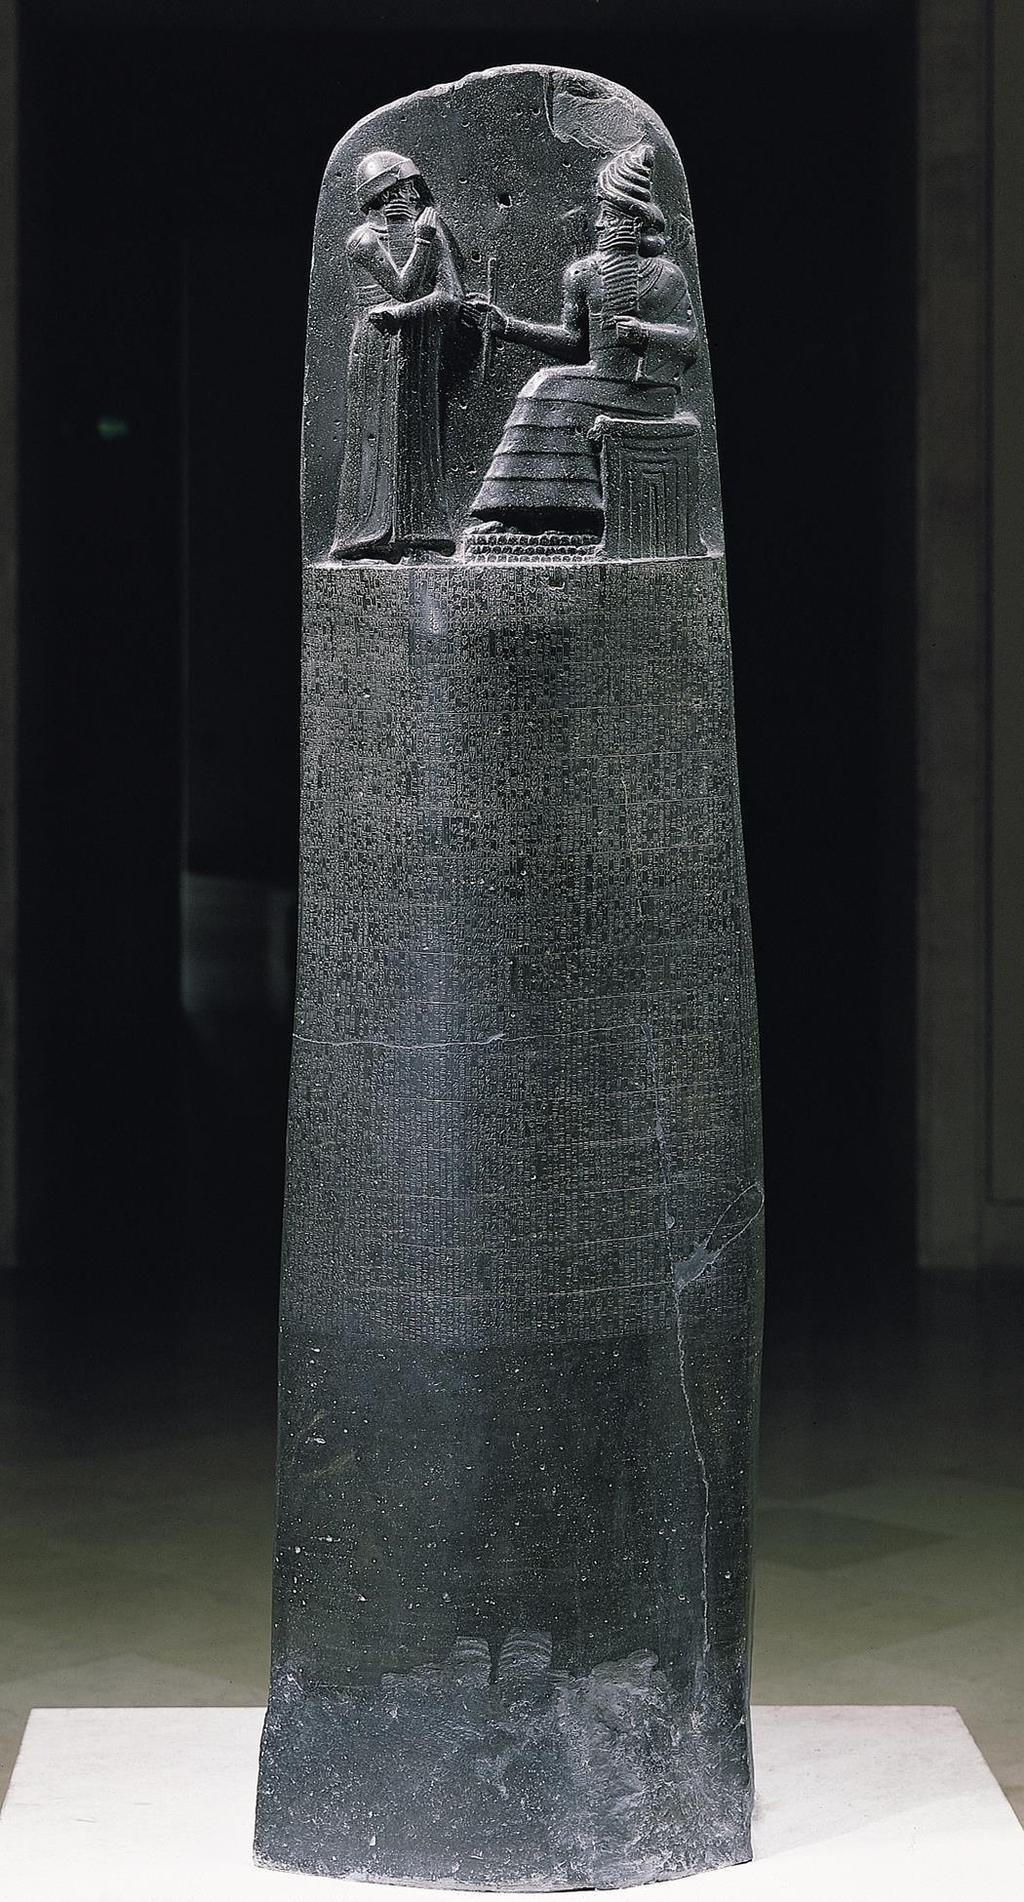 Hammurabi and the Law Hammurabi s code - Oldest Law Code - Lists 282 laws - Includes all kinds of laws - Needed to have a uniform